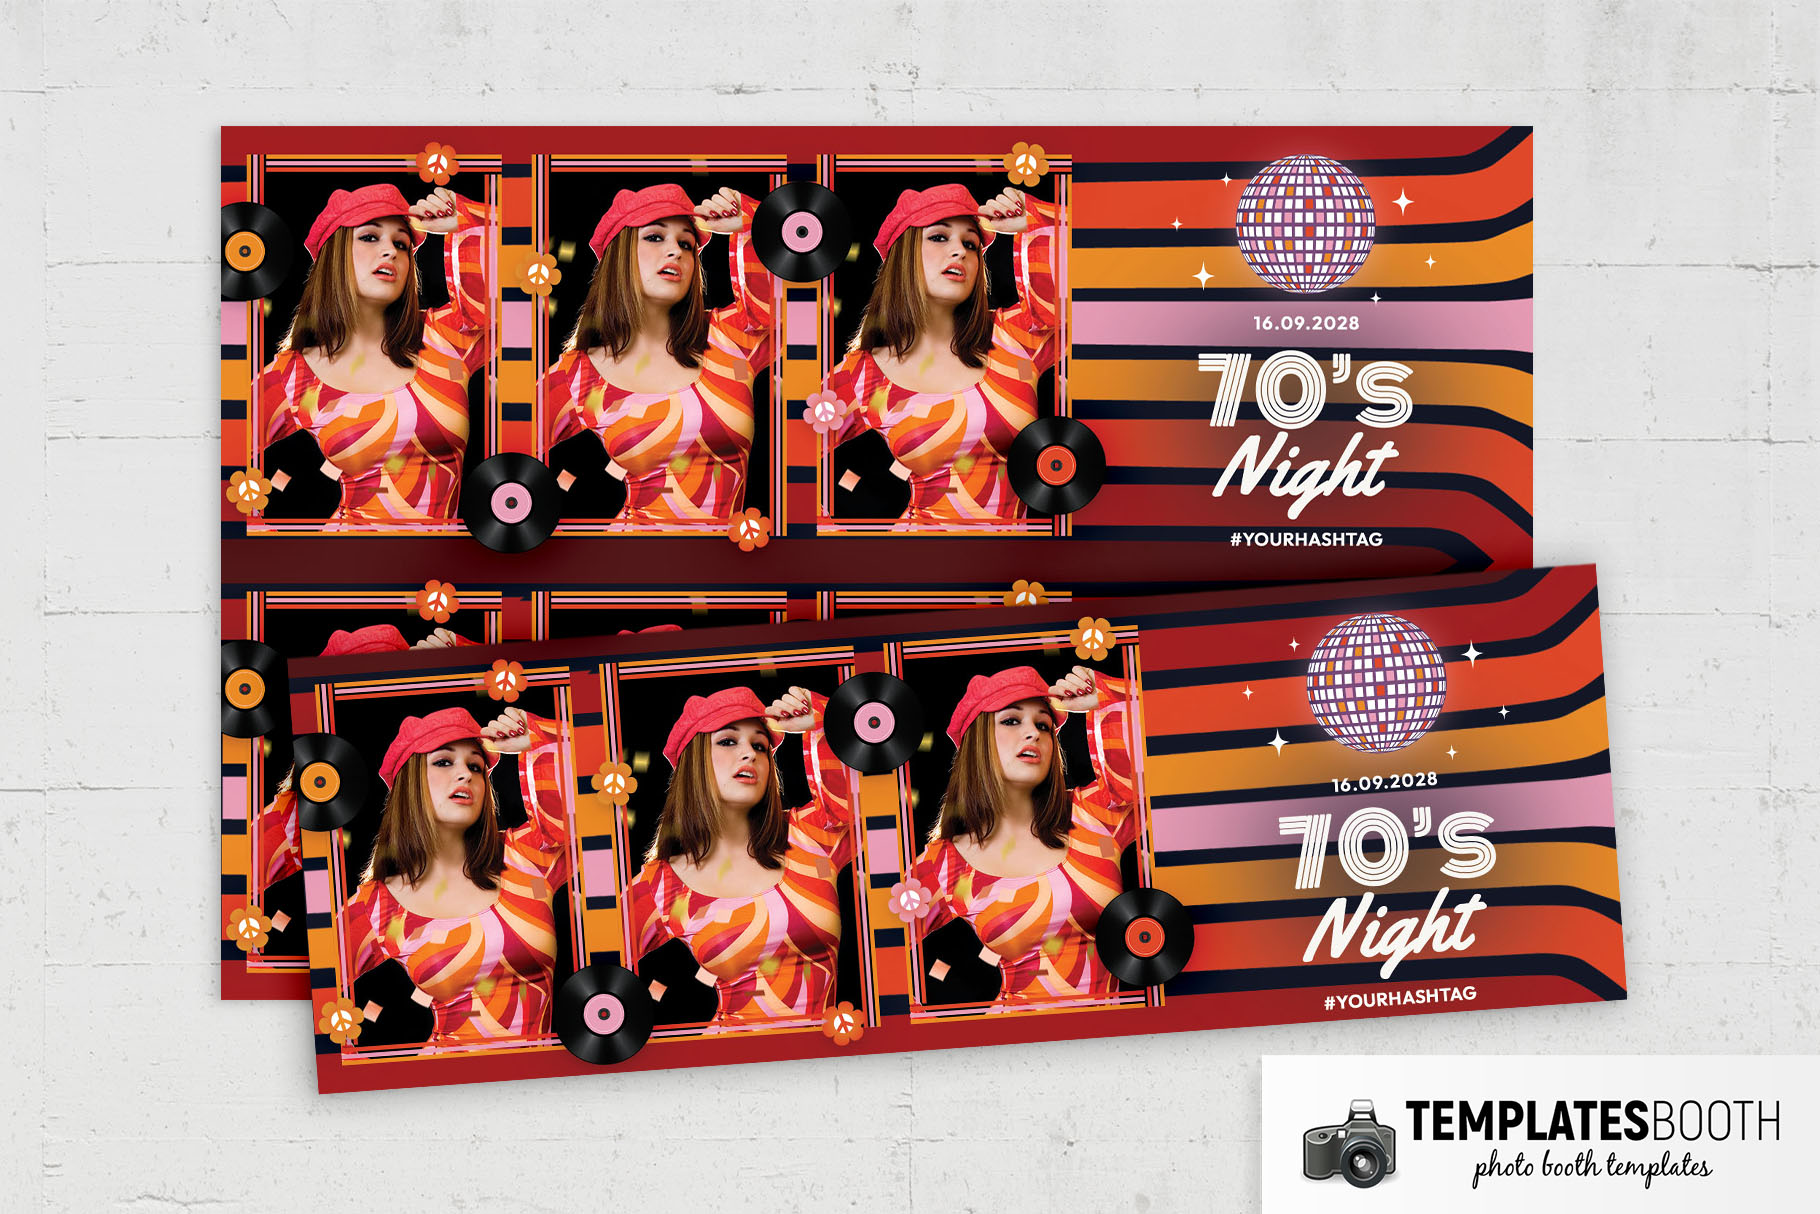 70s Night Photo Booth Template